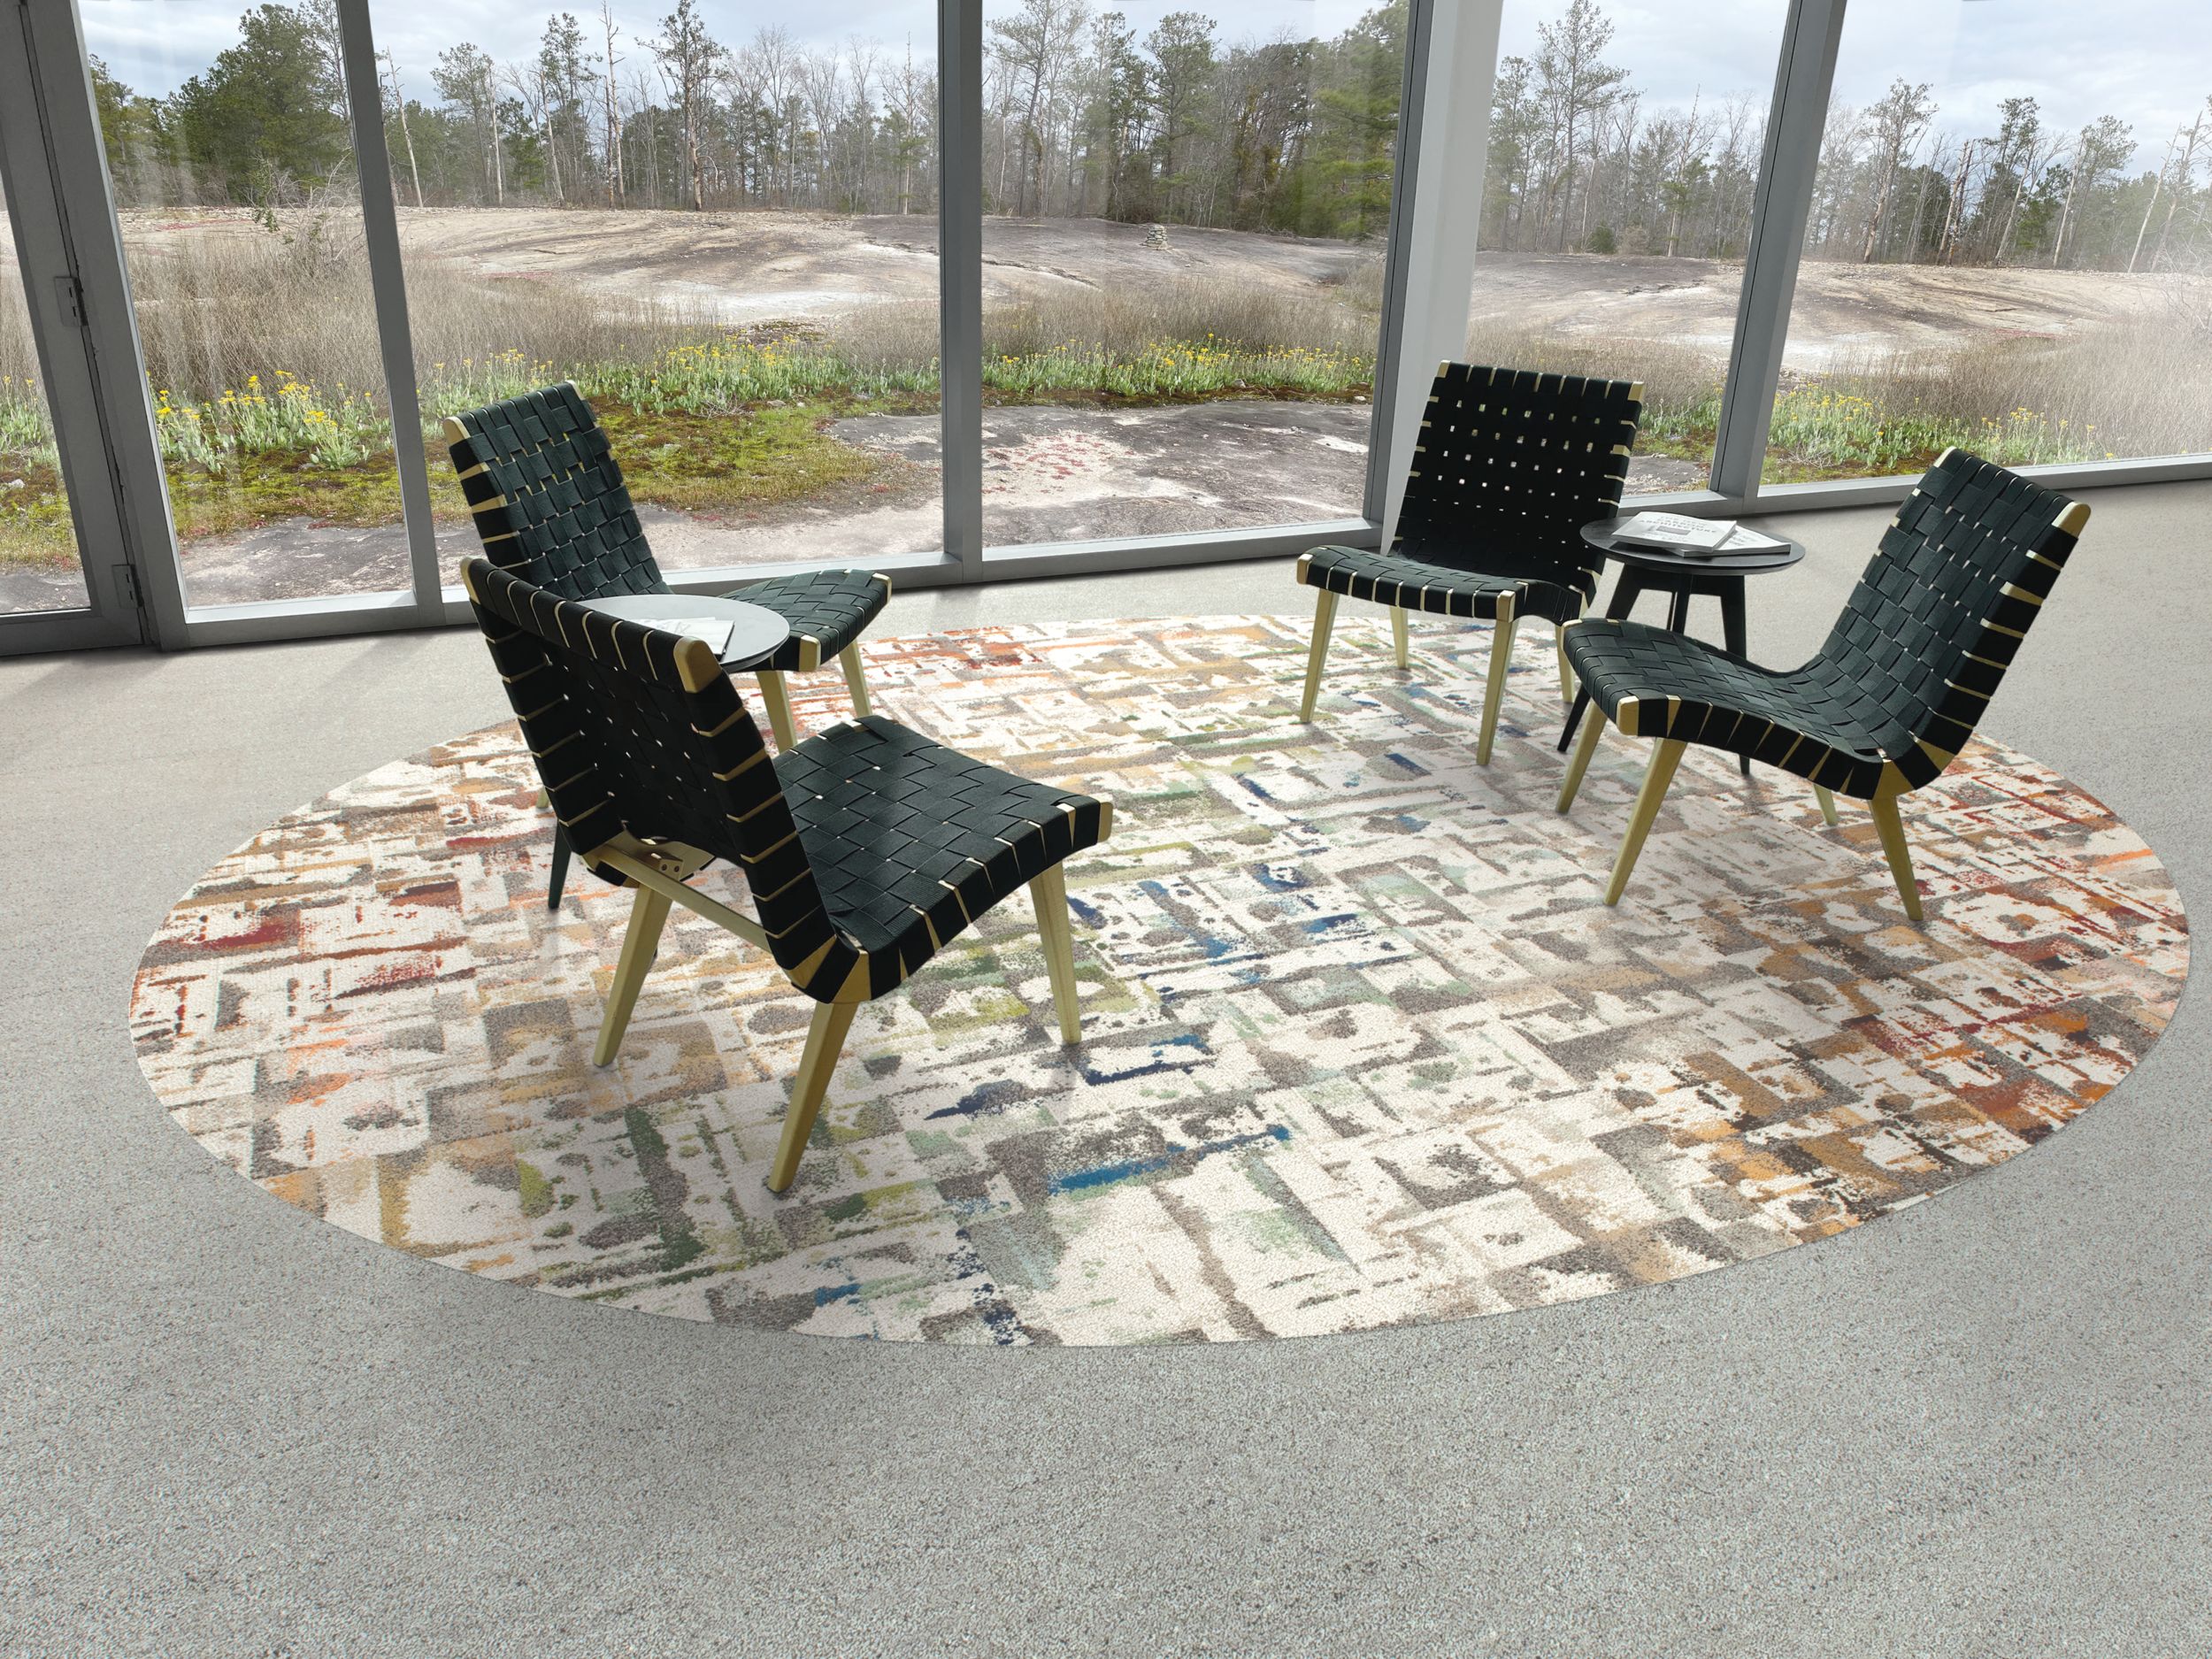 Interface Panola Mountain and Rockland Road carpet tile in glass-enclosed seating area with four chairs numéro d’image 10